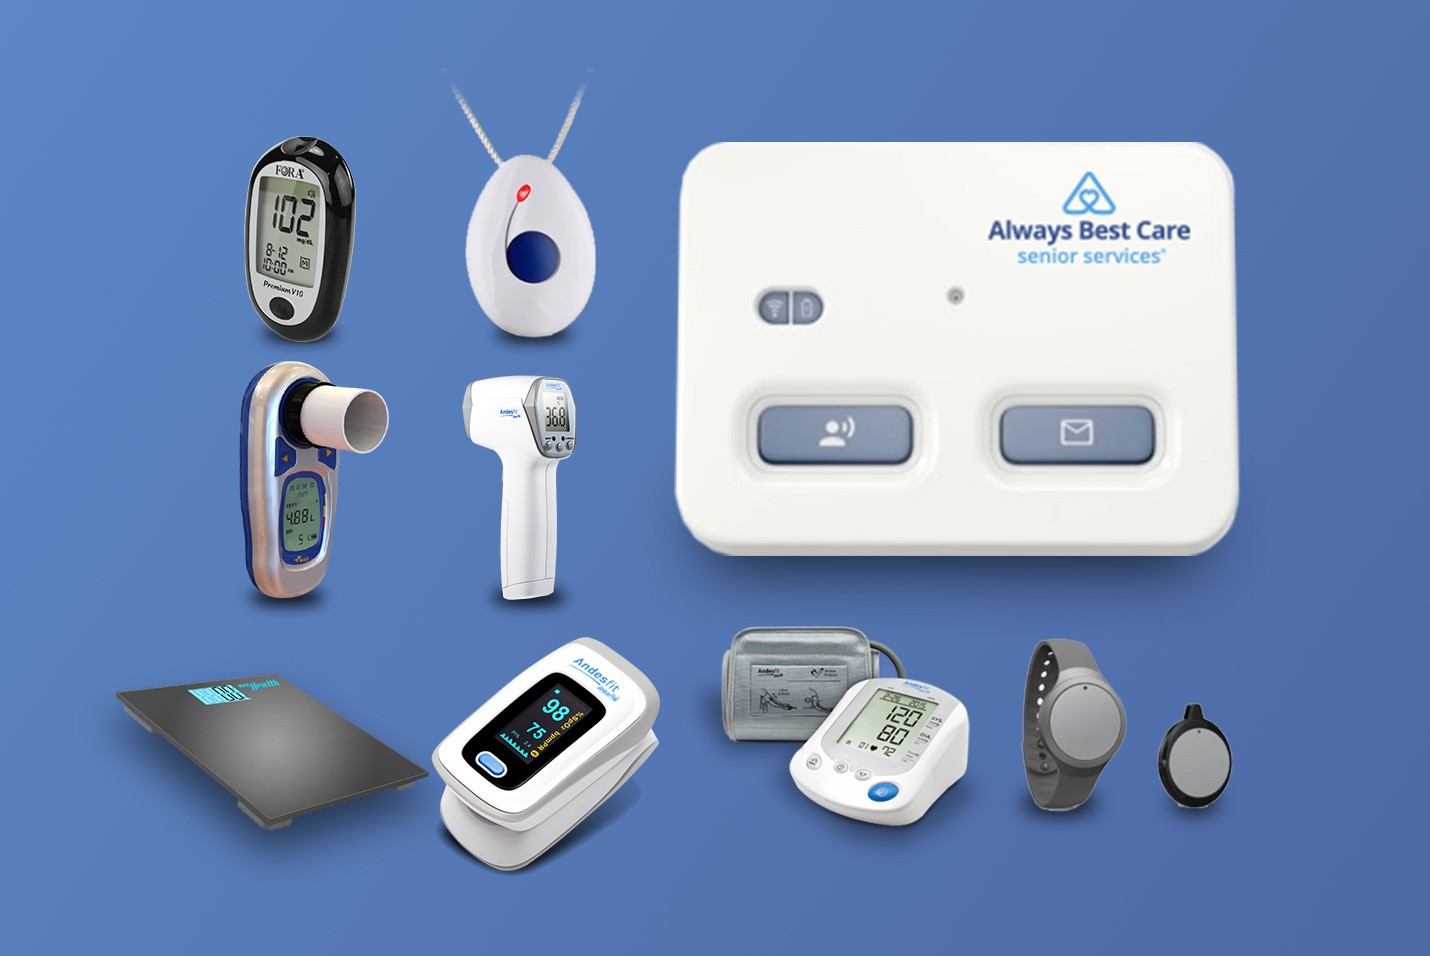 Always Best Care Senior Services Partners With Anelto to Deploy Innovative Remote Patient Monitoring Program Across Their Entire Network of 200+ Locations